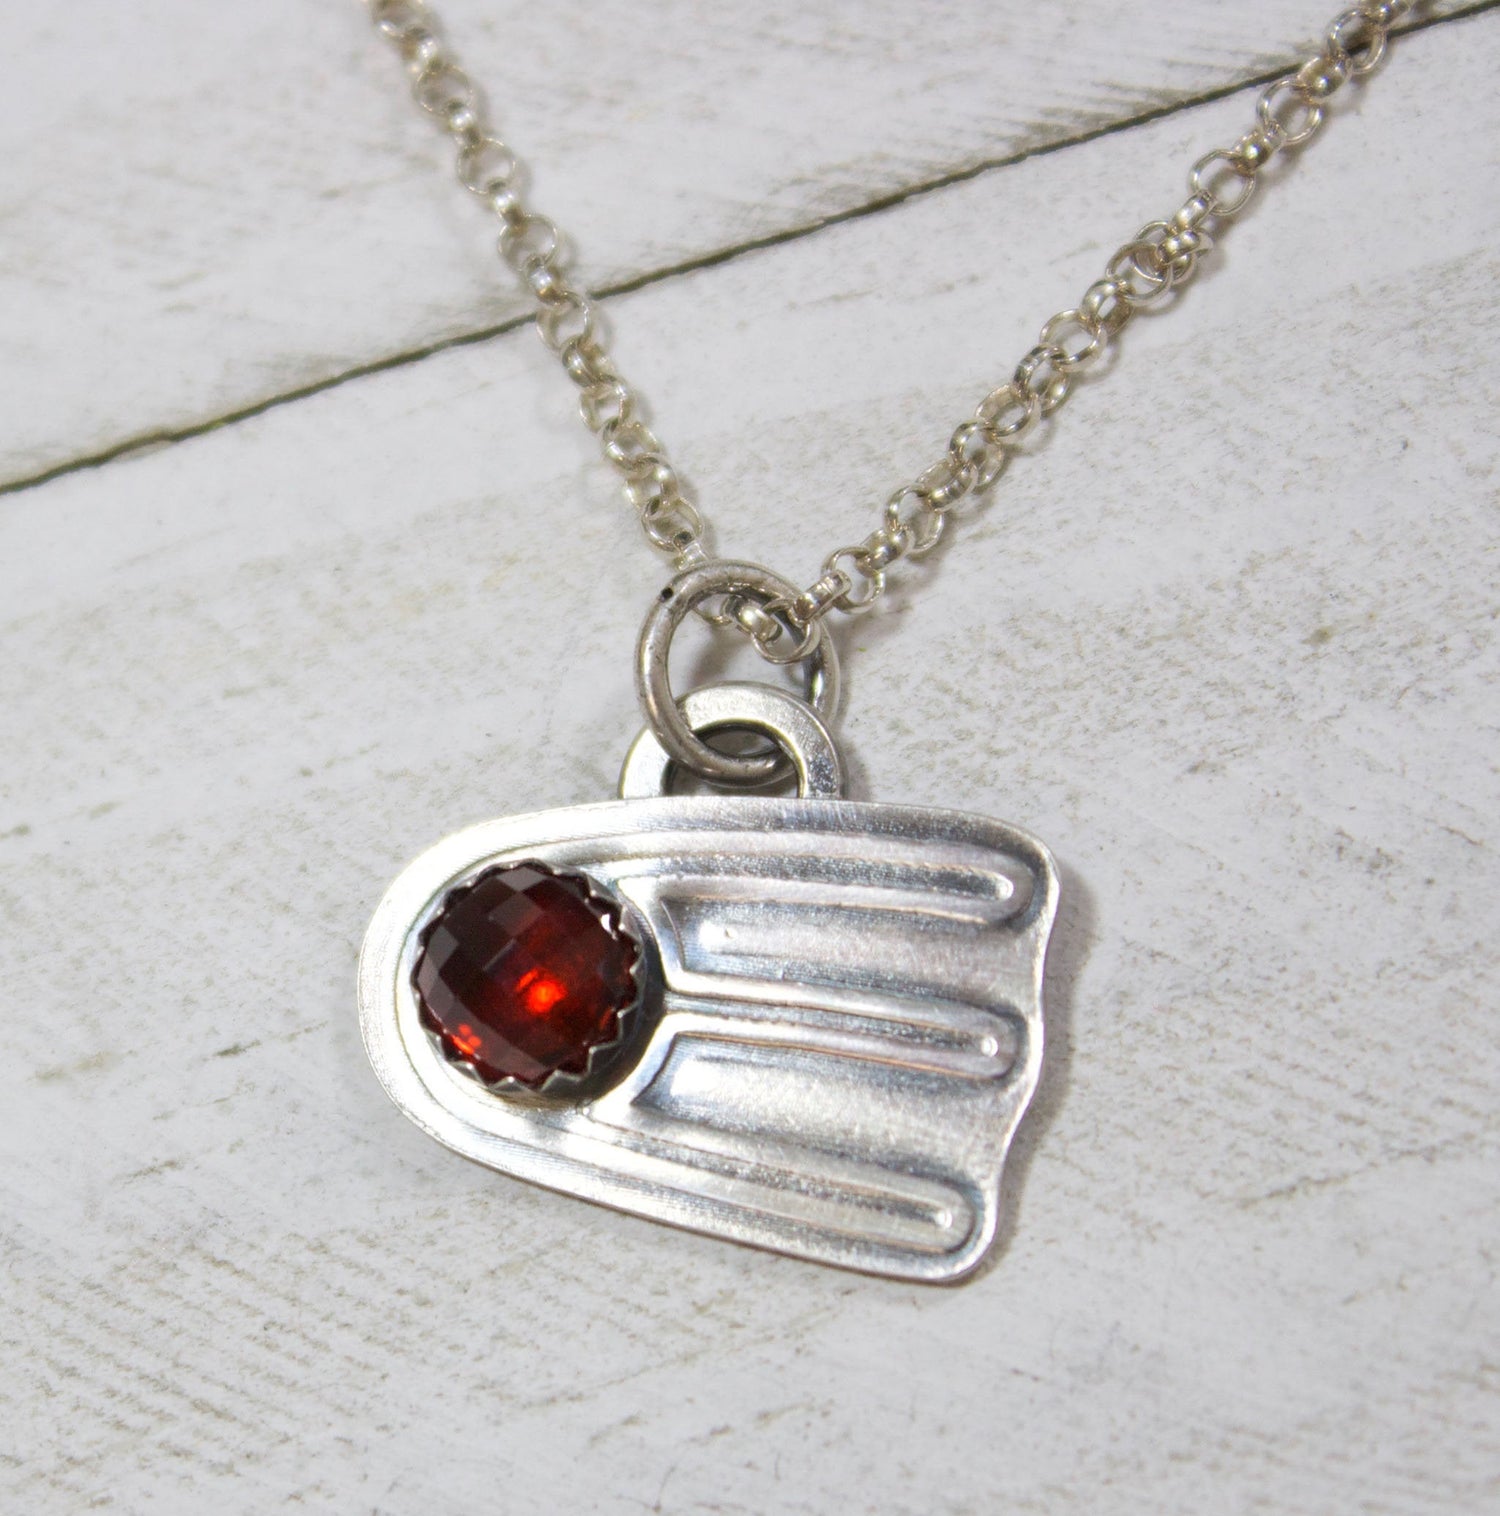 Comet shaped sterling silver pendant with a rose cut red garnet